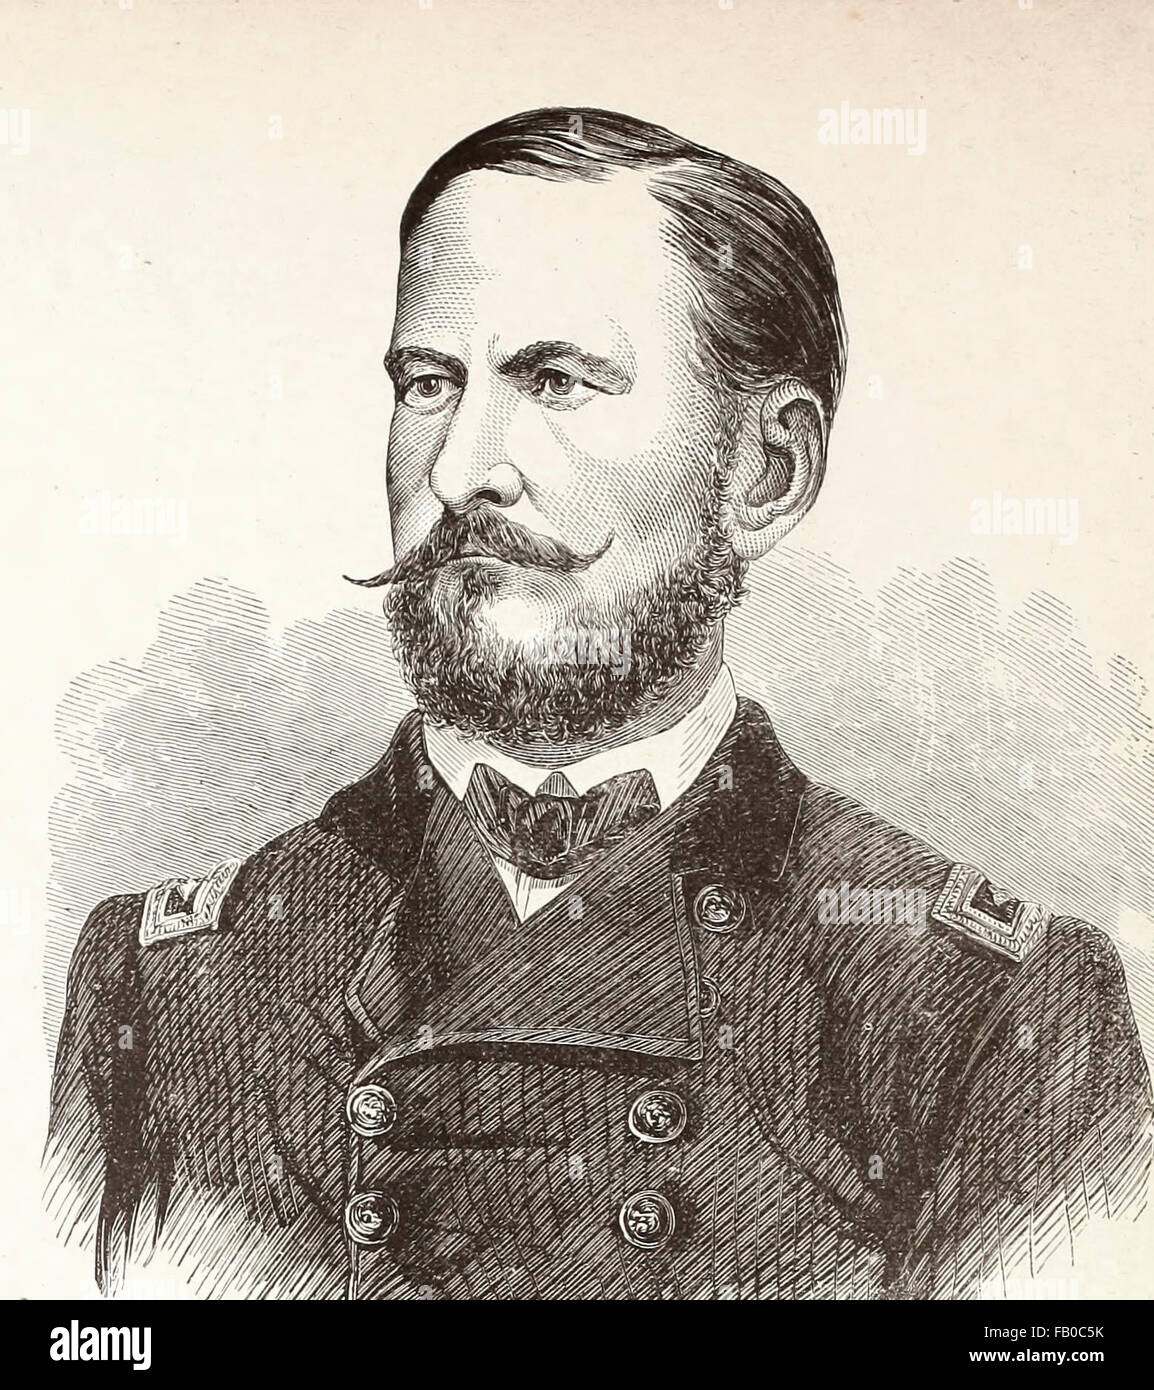 General Alfred Pleasonton - Alfred Pleasonton was a United States Army officer and major general of volunteers in the Union cavalry during the American Civil War. He commanded the Cavalry Corps of the Army of the Potomac during the Gettysburg Campaign, including the largest predominantly cavalry battle of the war, Brandy Station. Stock Photo